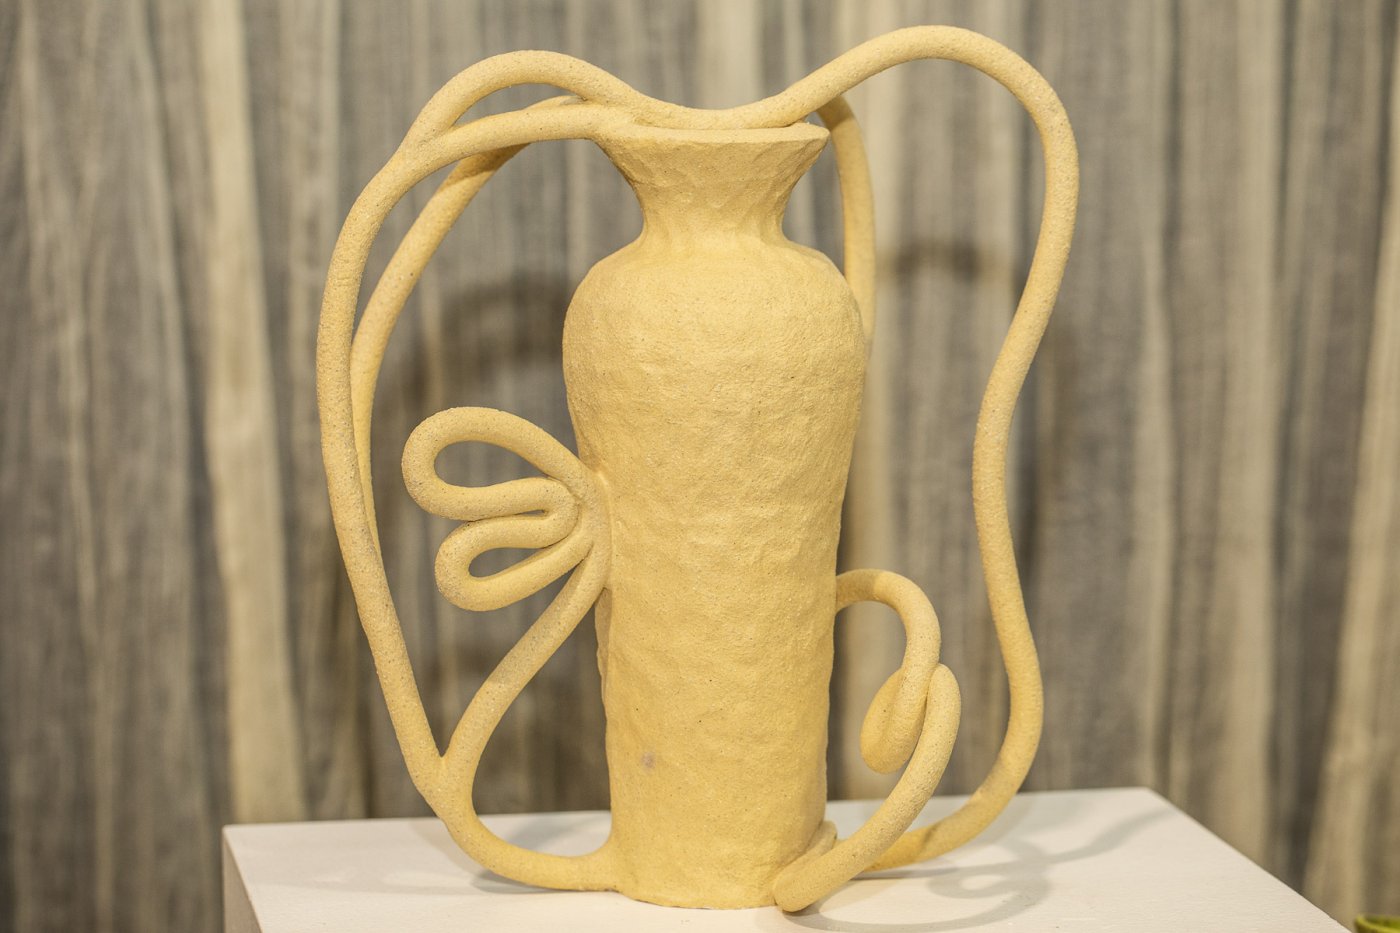 Large ceramic vessel inspired by a baroque candelabra.